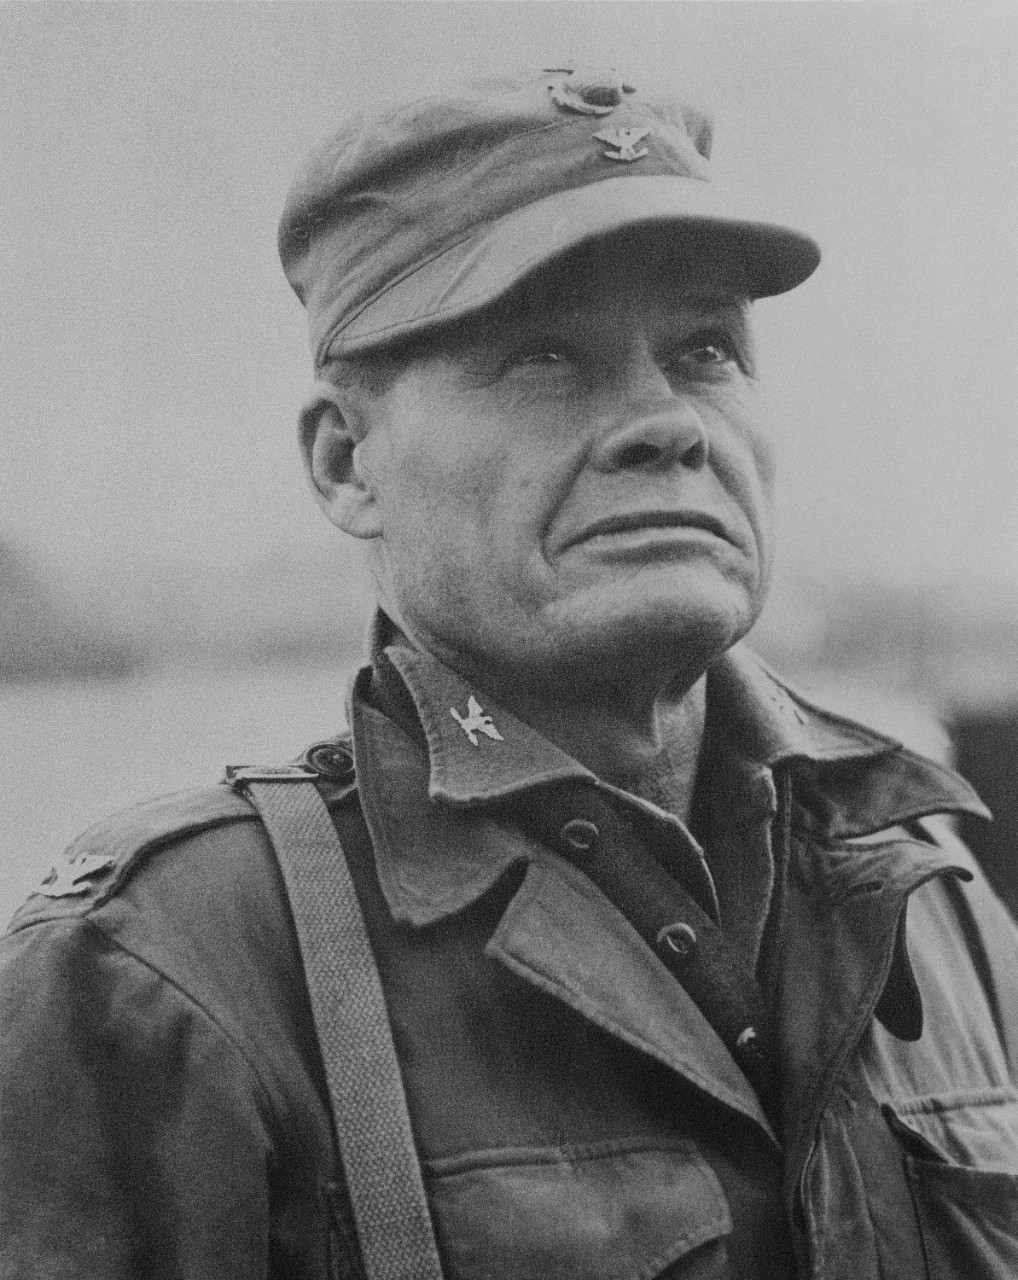 Colonel Lewis B. “Chesty” Puller, USMC